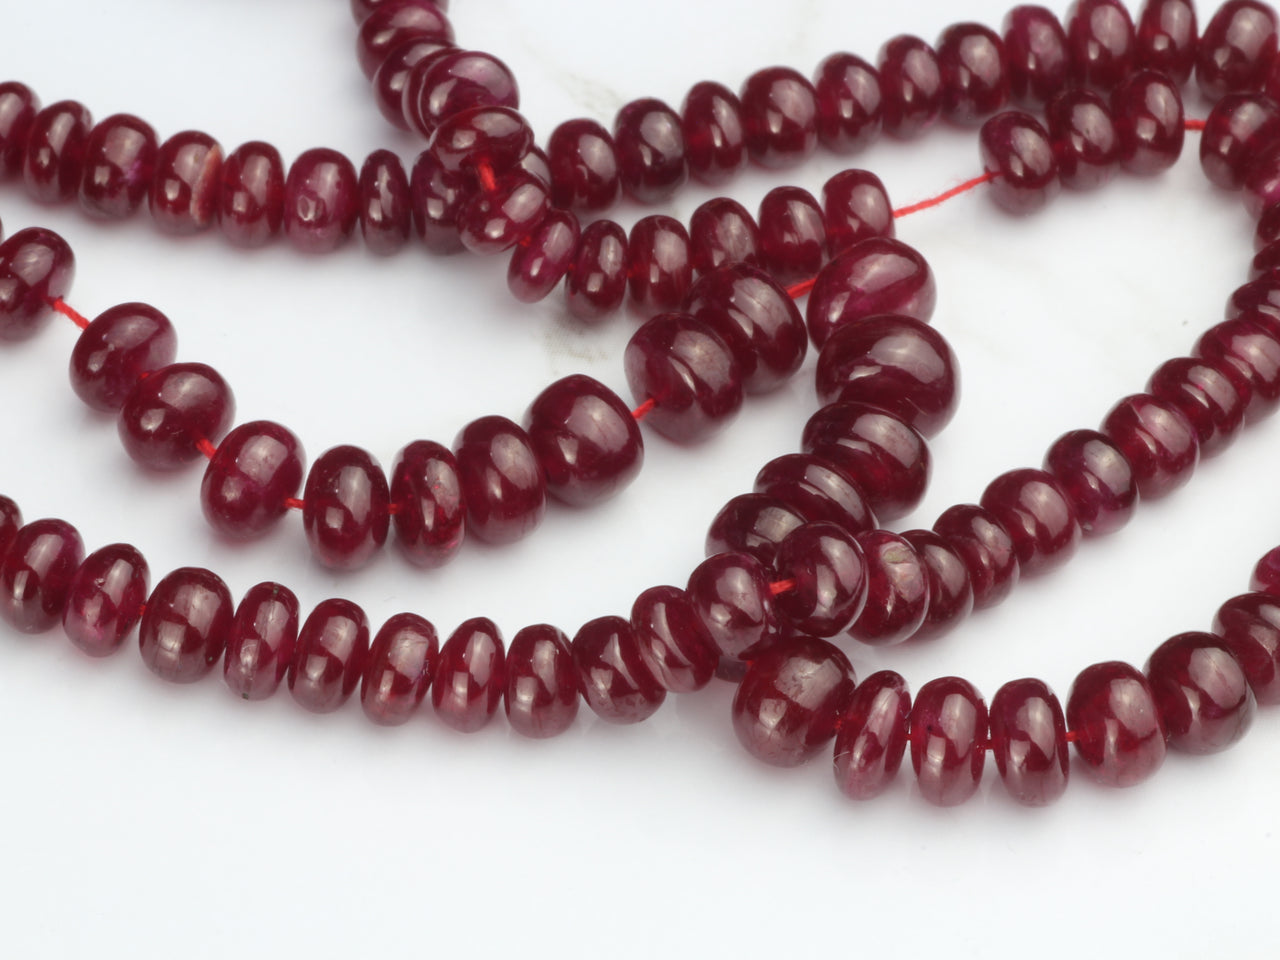 Red Ruby 4.5mm - 6.5mm Smooth Rondelles Bead Strand